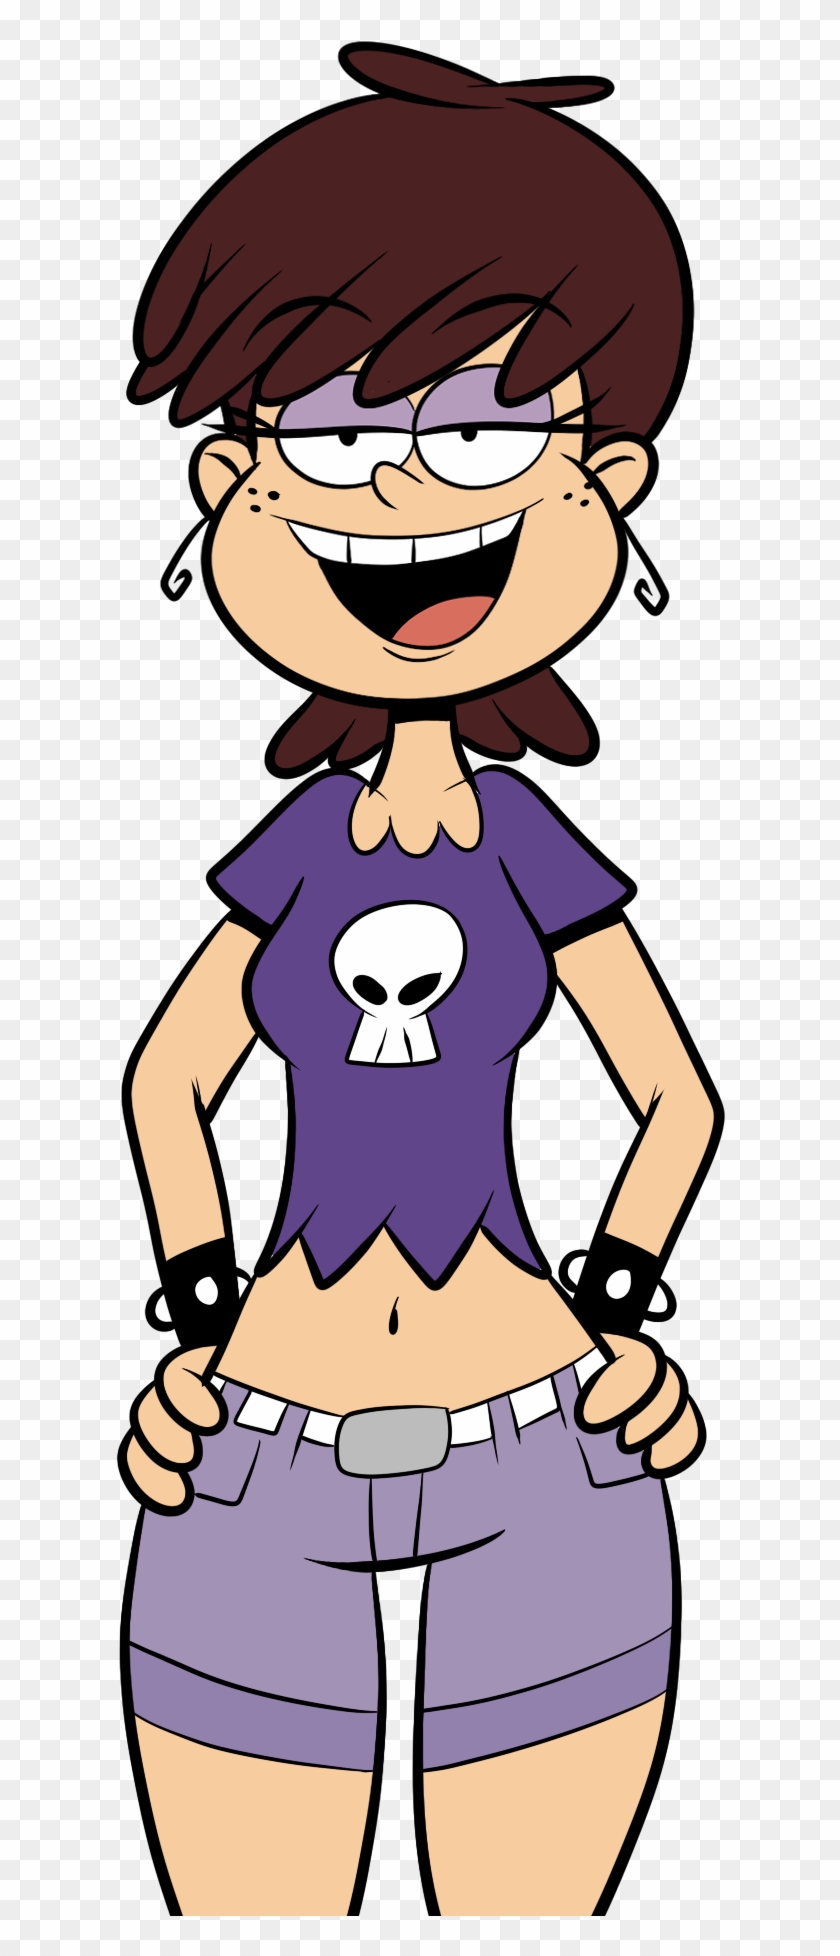 Luna Loud Lucy Loud Youtube Know Your Meme Animation - Luna Loud Lucy Loud Youtube Know Your Meme Animation #354282